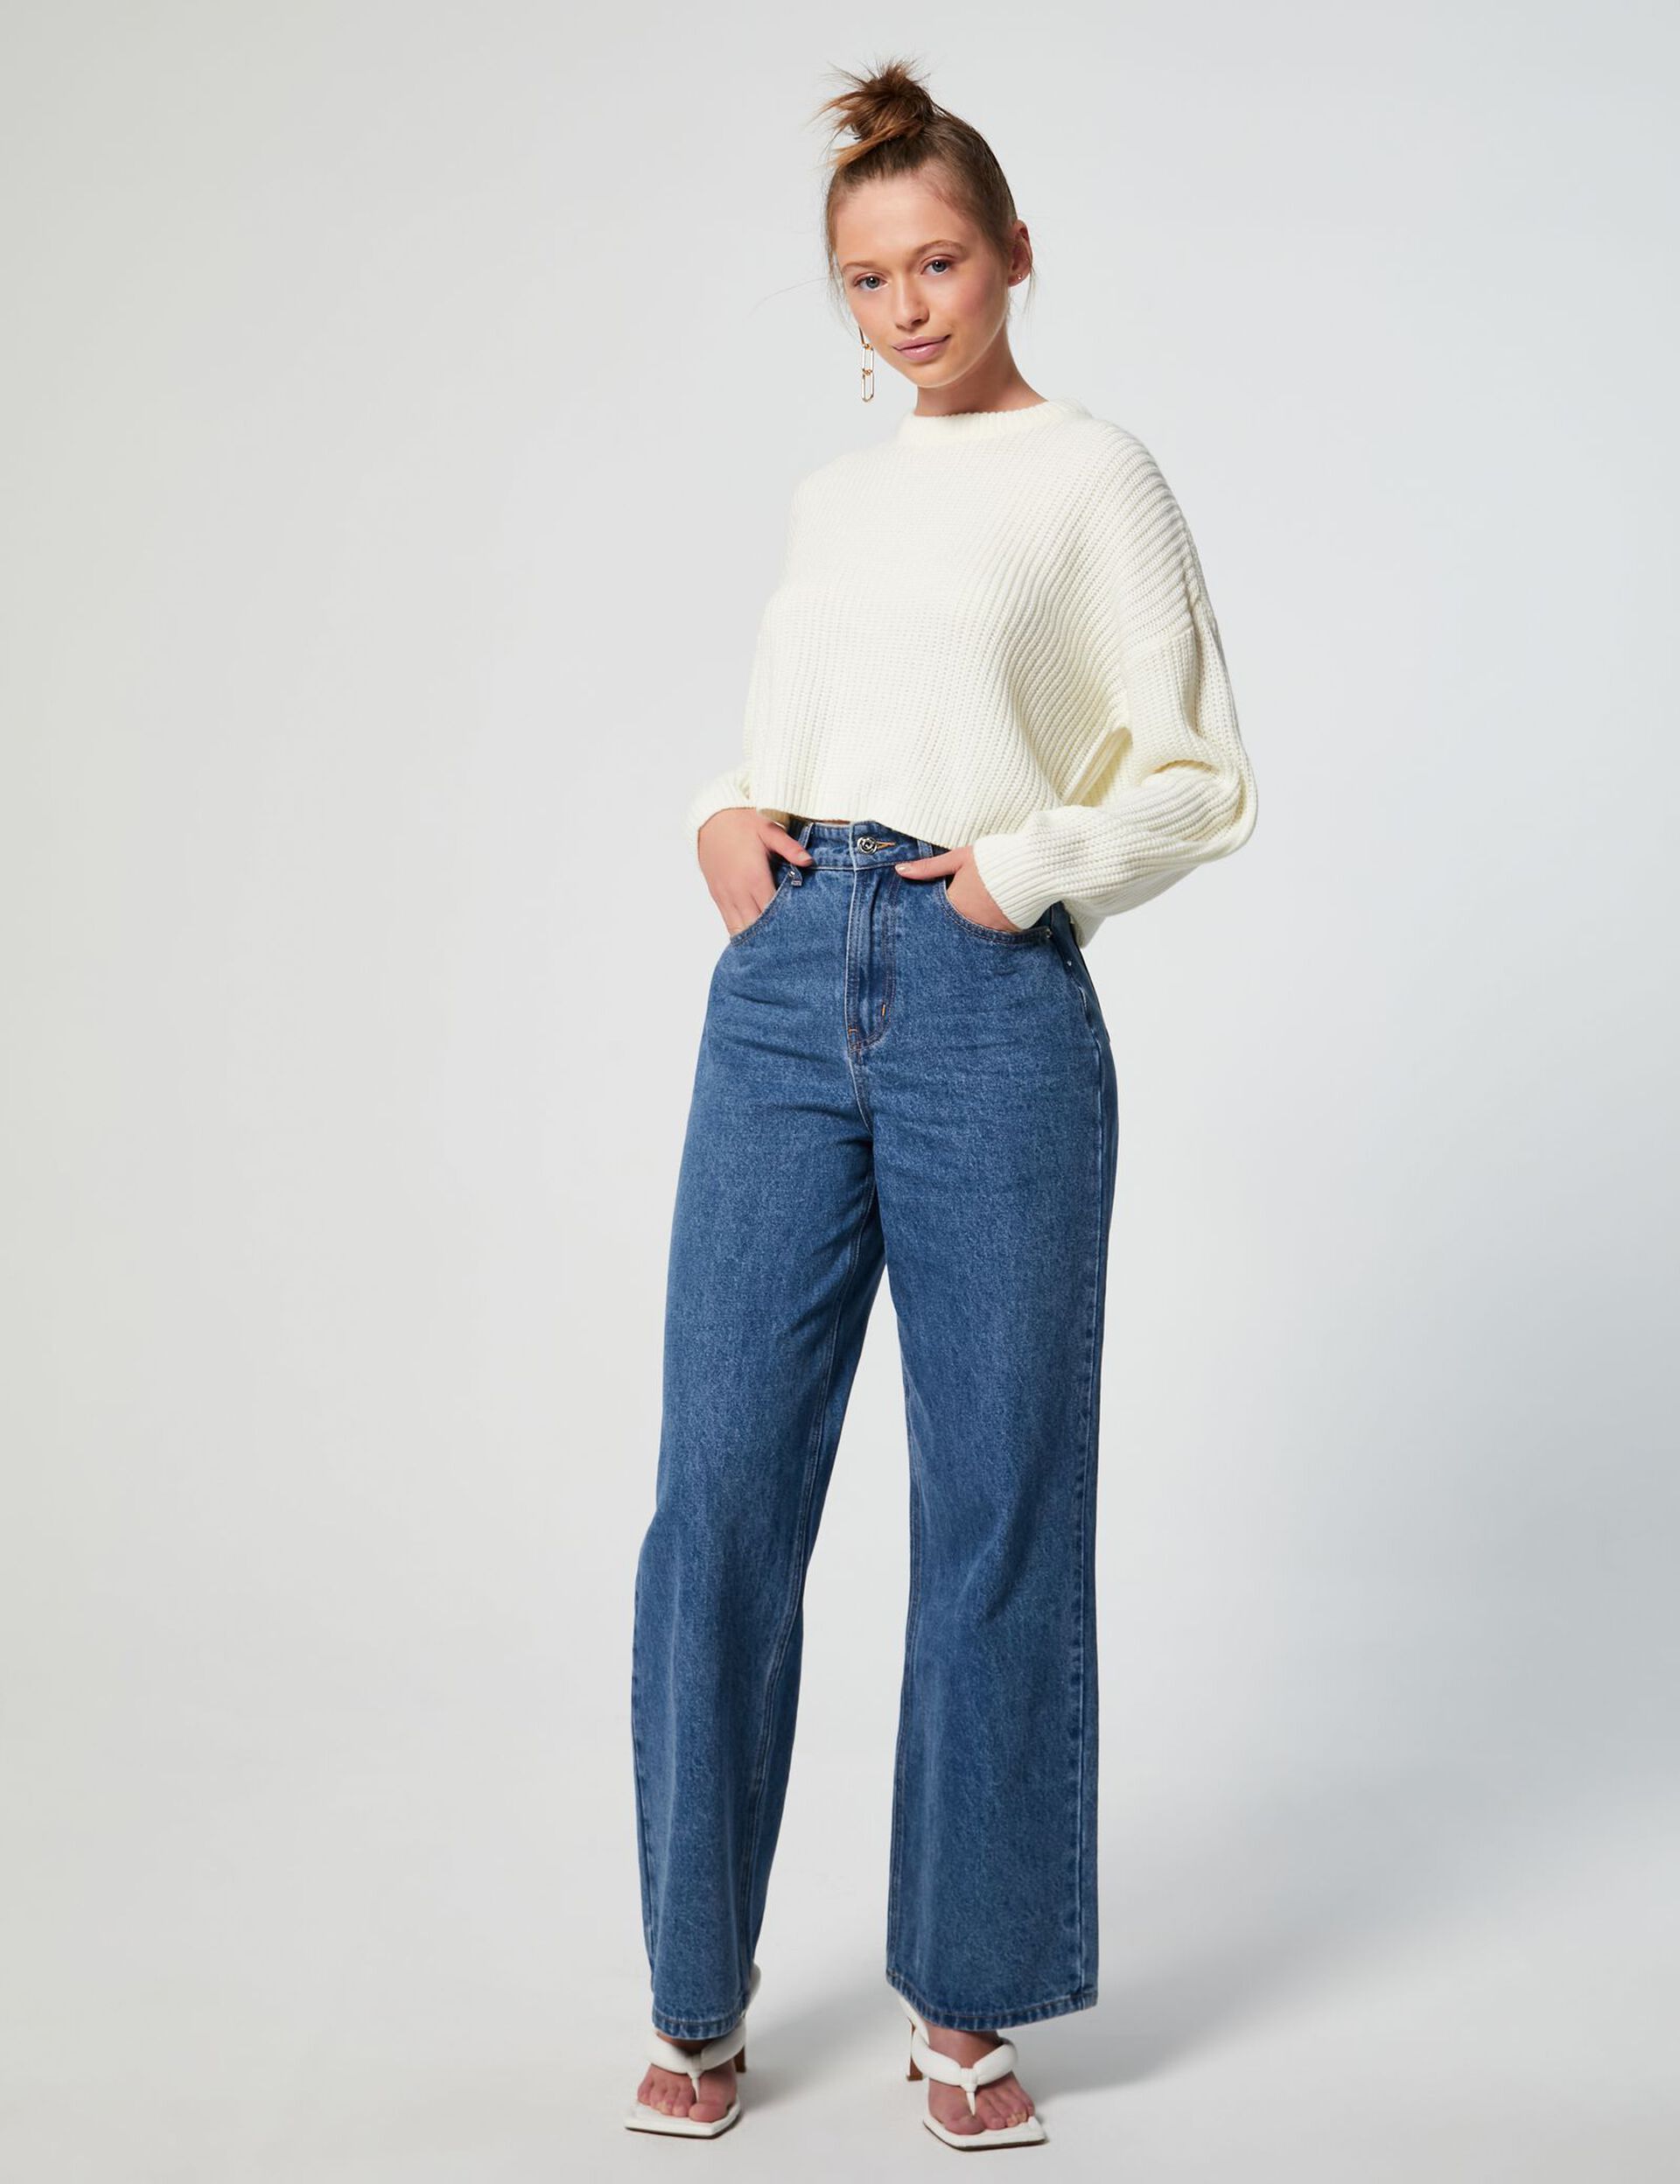 Cable-knit cropped jumper